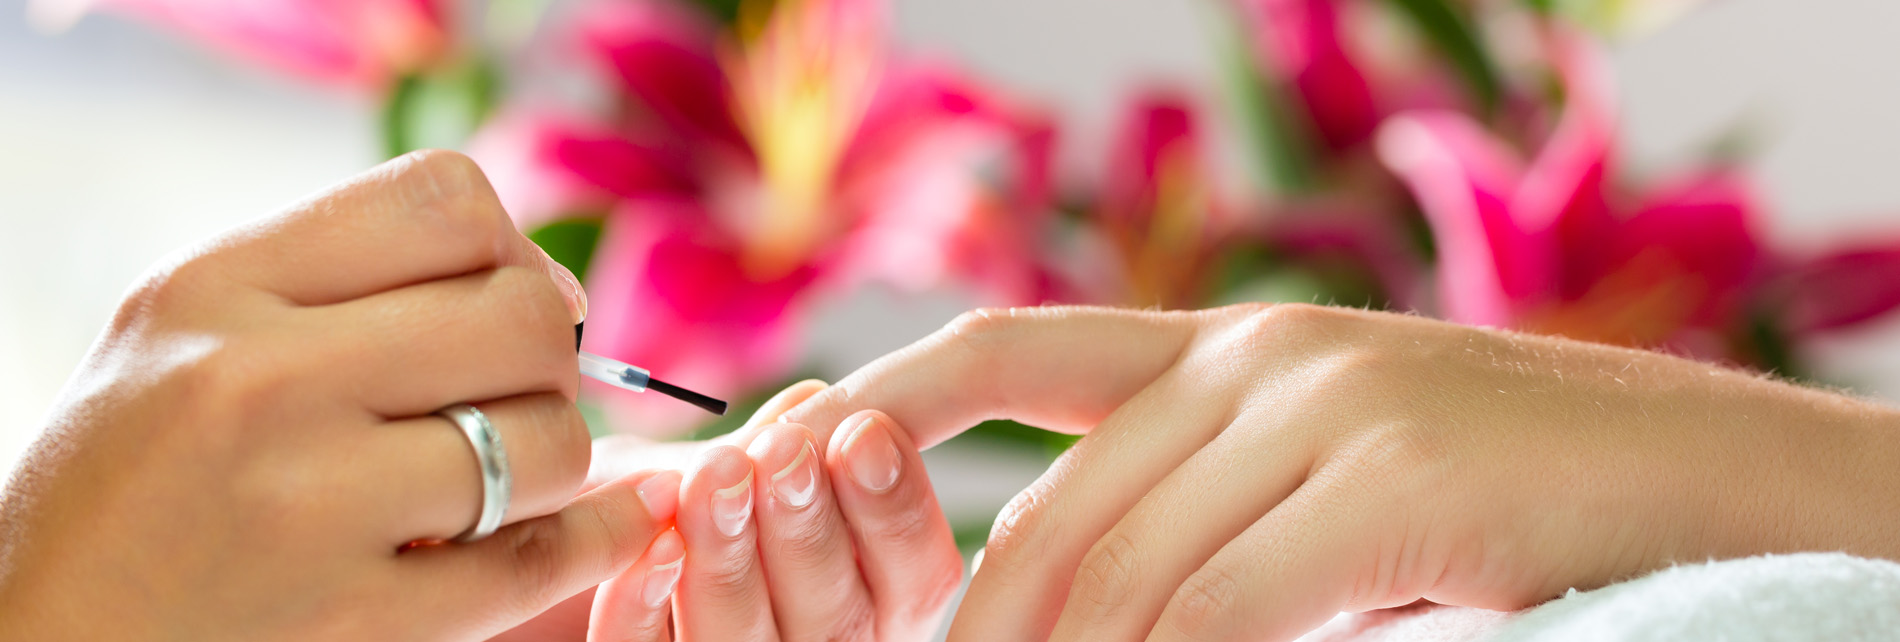 Spa Escape Packages - Spa - Nail